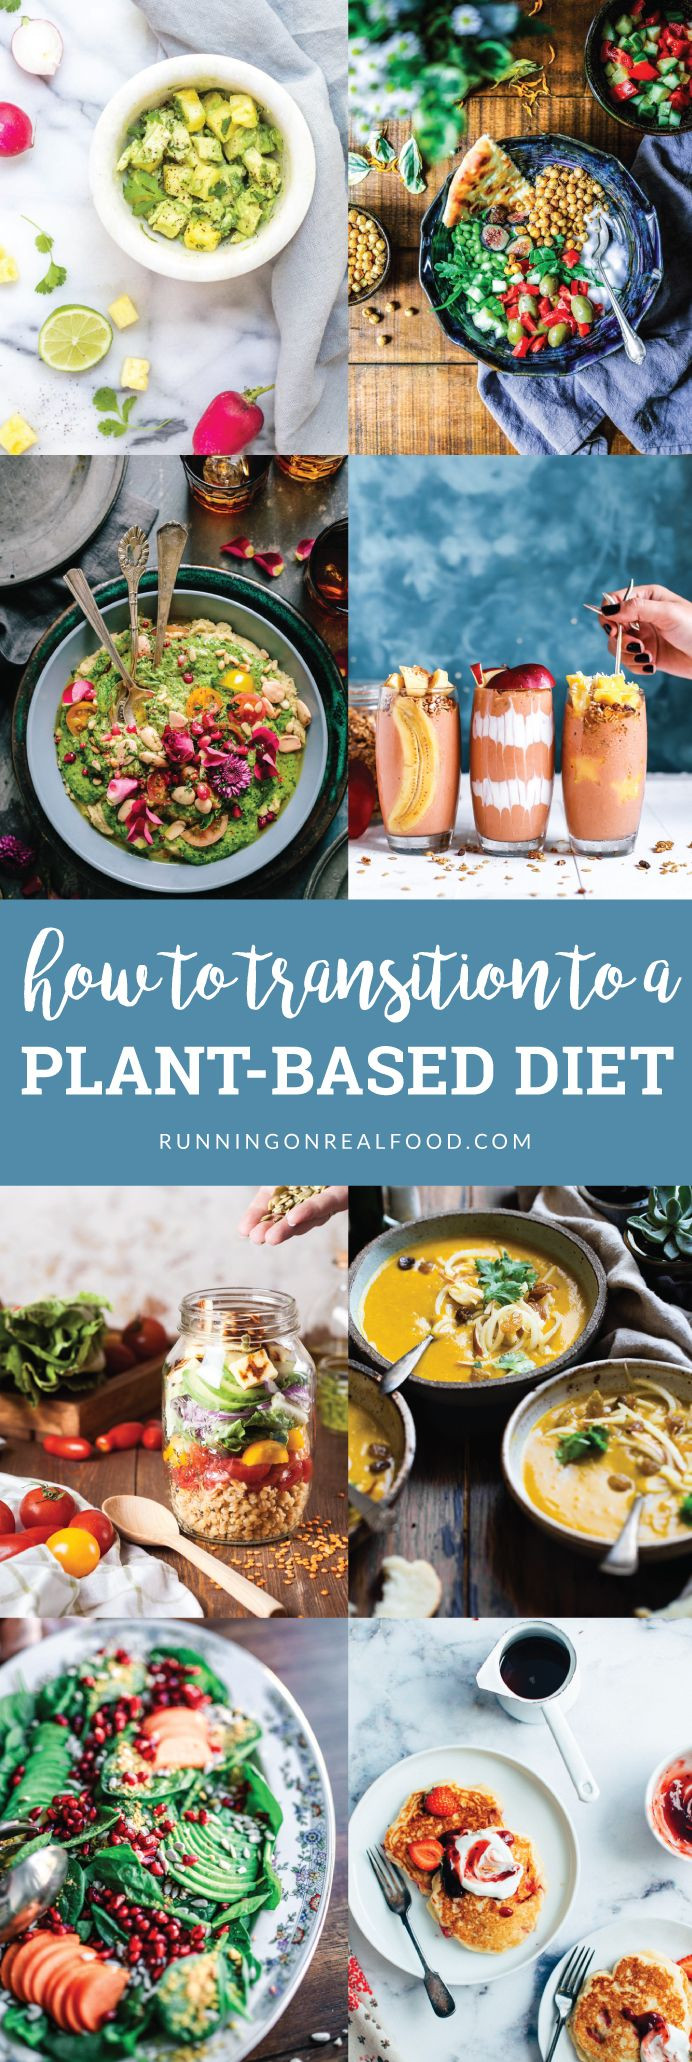 How To Transition To Plant Based Diet
 How to Transition to a Plant Based Diet